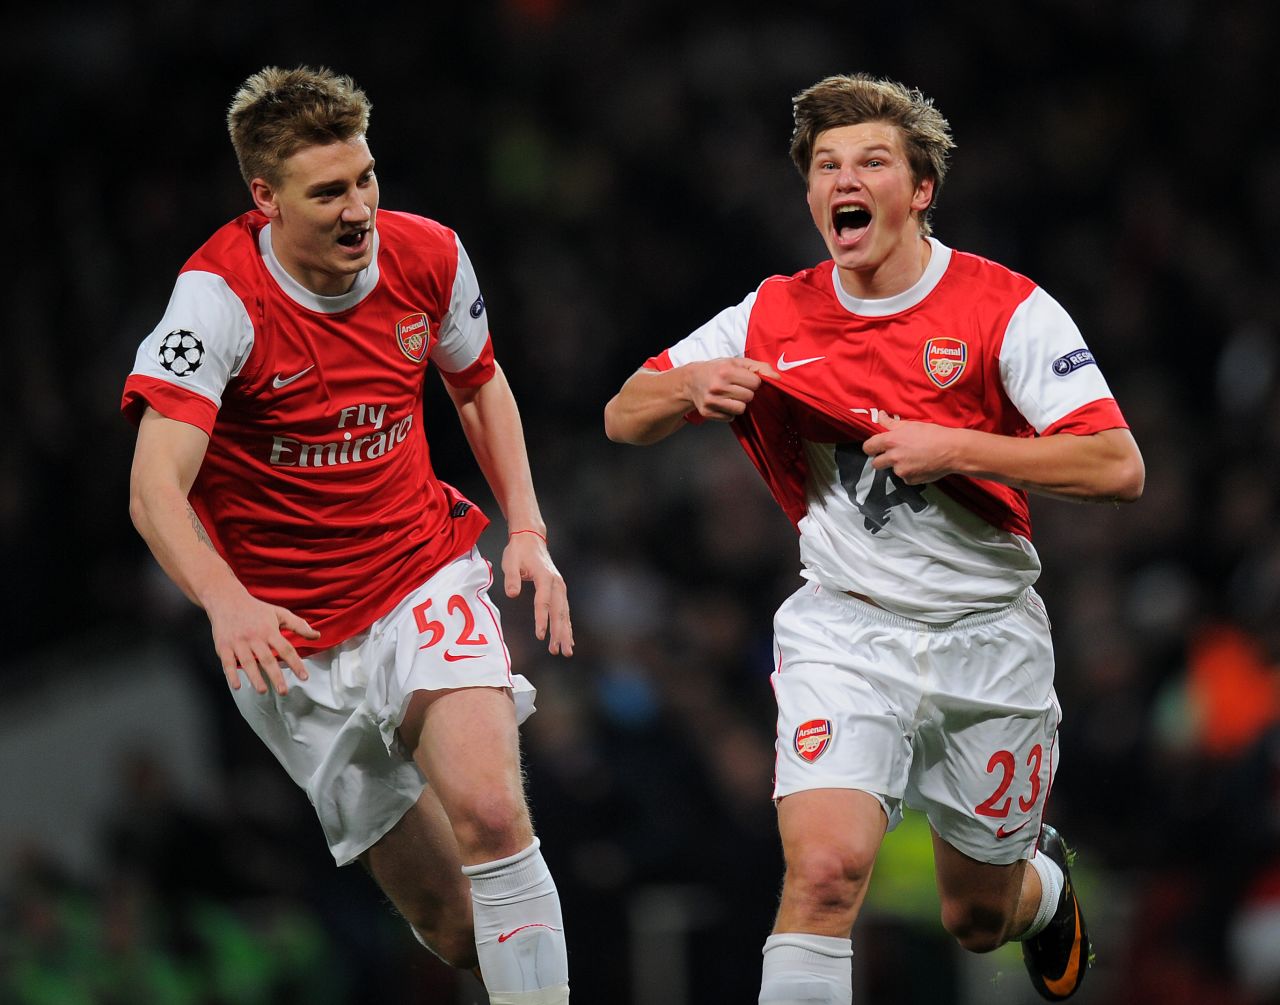 The diminutive Russian scored some pivotal goals at Arsenal -- none bigger than his Champions League winner against Barcelona in 2011 (which he is seen celebrating on the right, with Nicklas Bendtner). Arshavin was bought for a then-club record fee of £14.03 from Zenit St. Petersburg in 2008. After scoring 23 goals in 105 appearances for the Gunners, he returned to Zenit on a free transfer in 2013. 